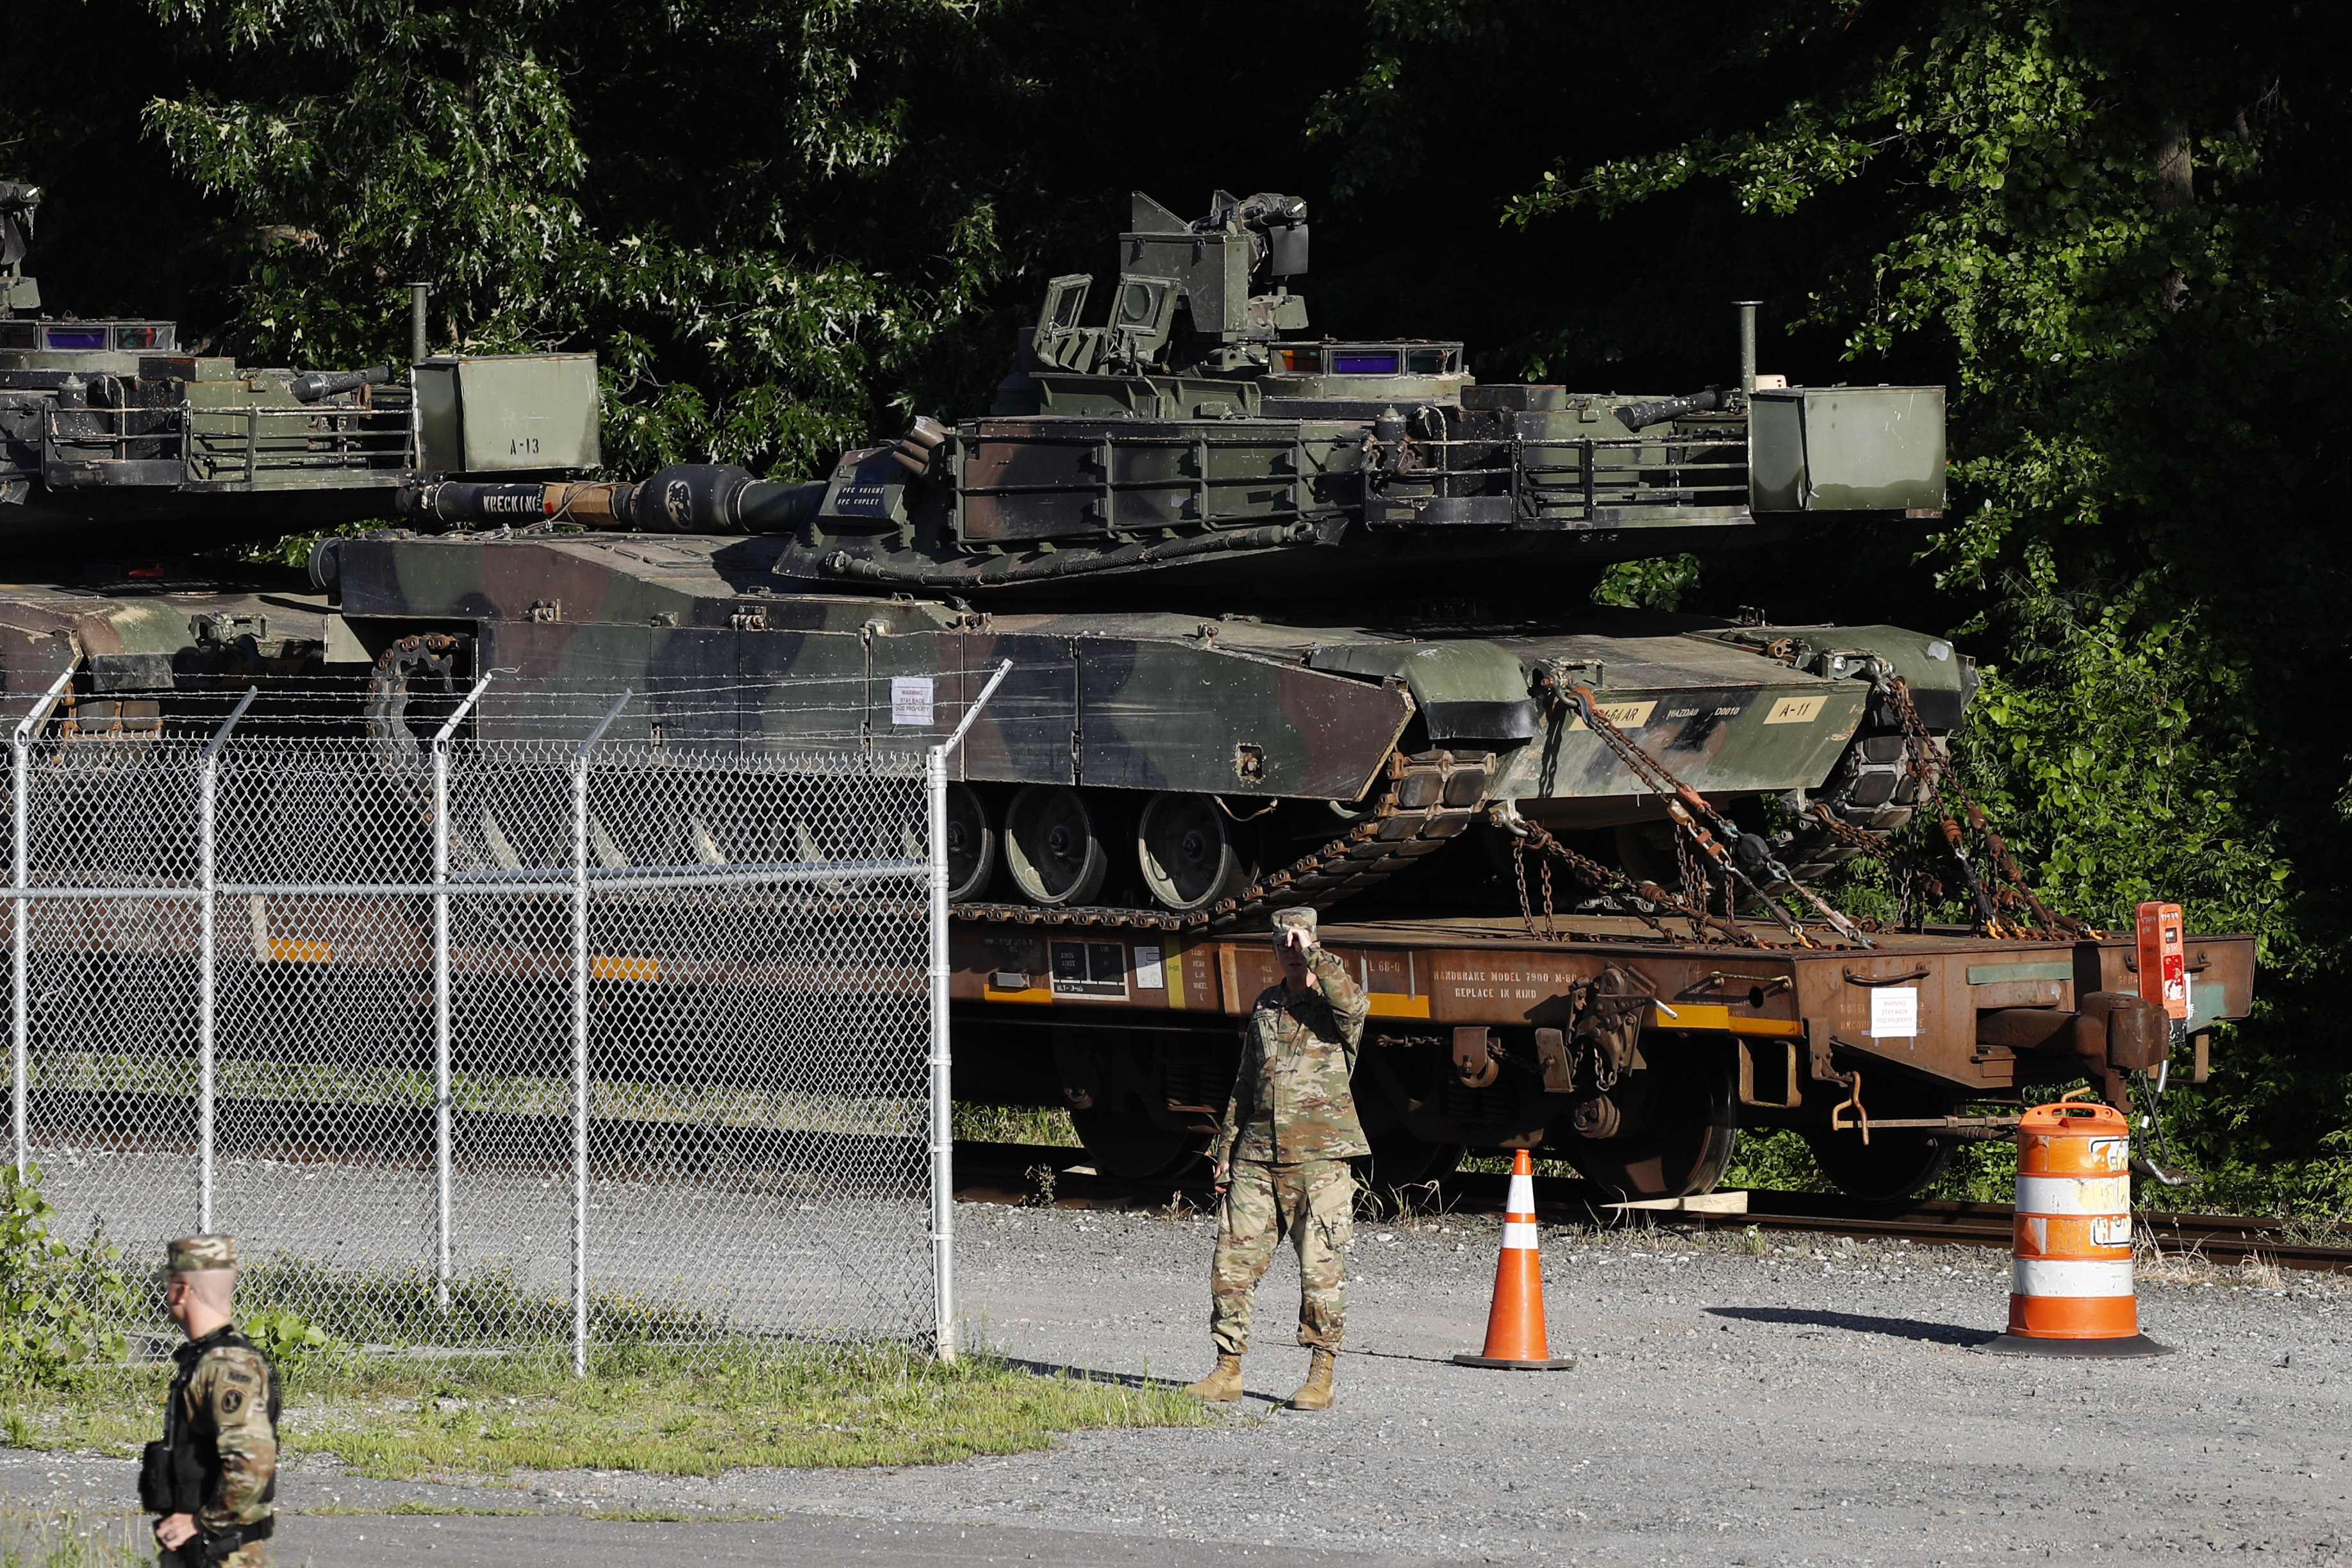 Military police walk near Abrams tanks on a flat car in a rail yard ahead of a Fourth of July celebration that President Donald Trump says will include military hardware in Washington on Monday, July 1, 2019. (Patrick Semansky—AP)